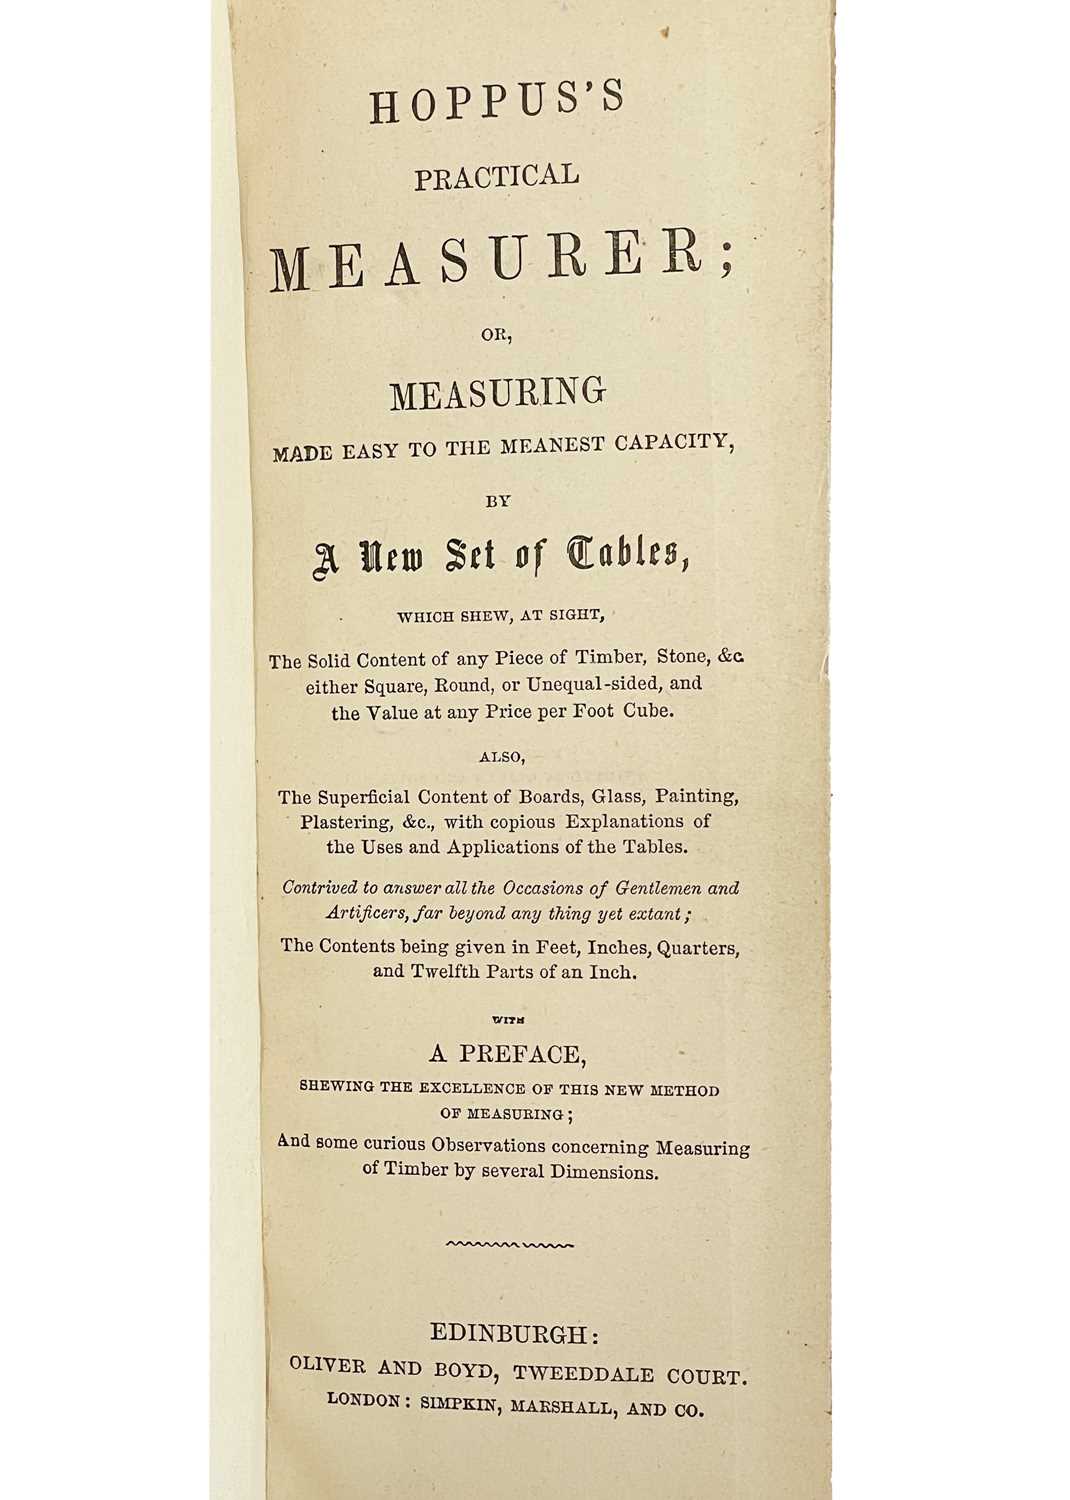 E. Hoppus 'Practical Measuring Made Easy To the Meanest Capacity By a New Set of Tables,' - Image 2 of 4